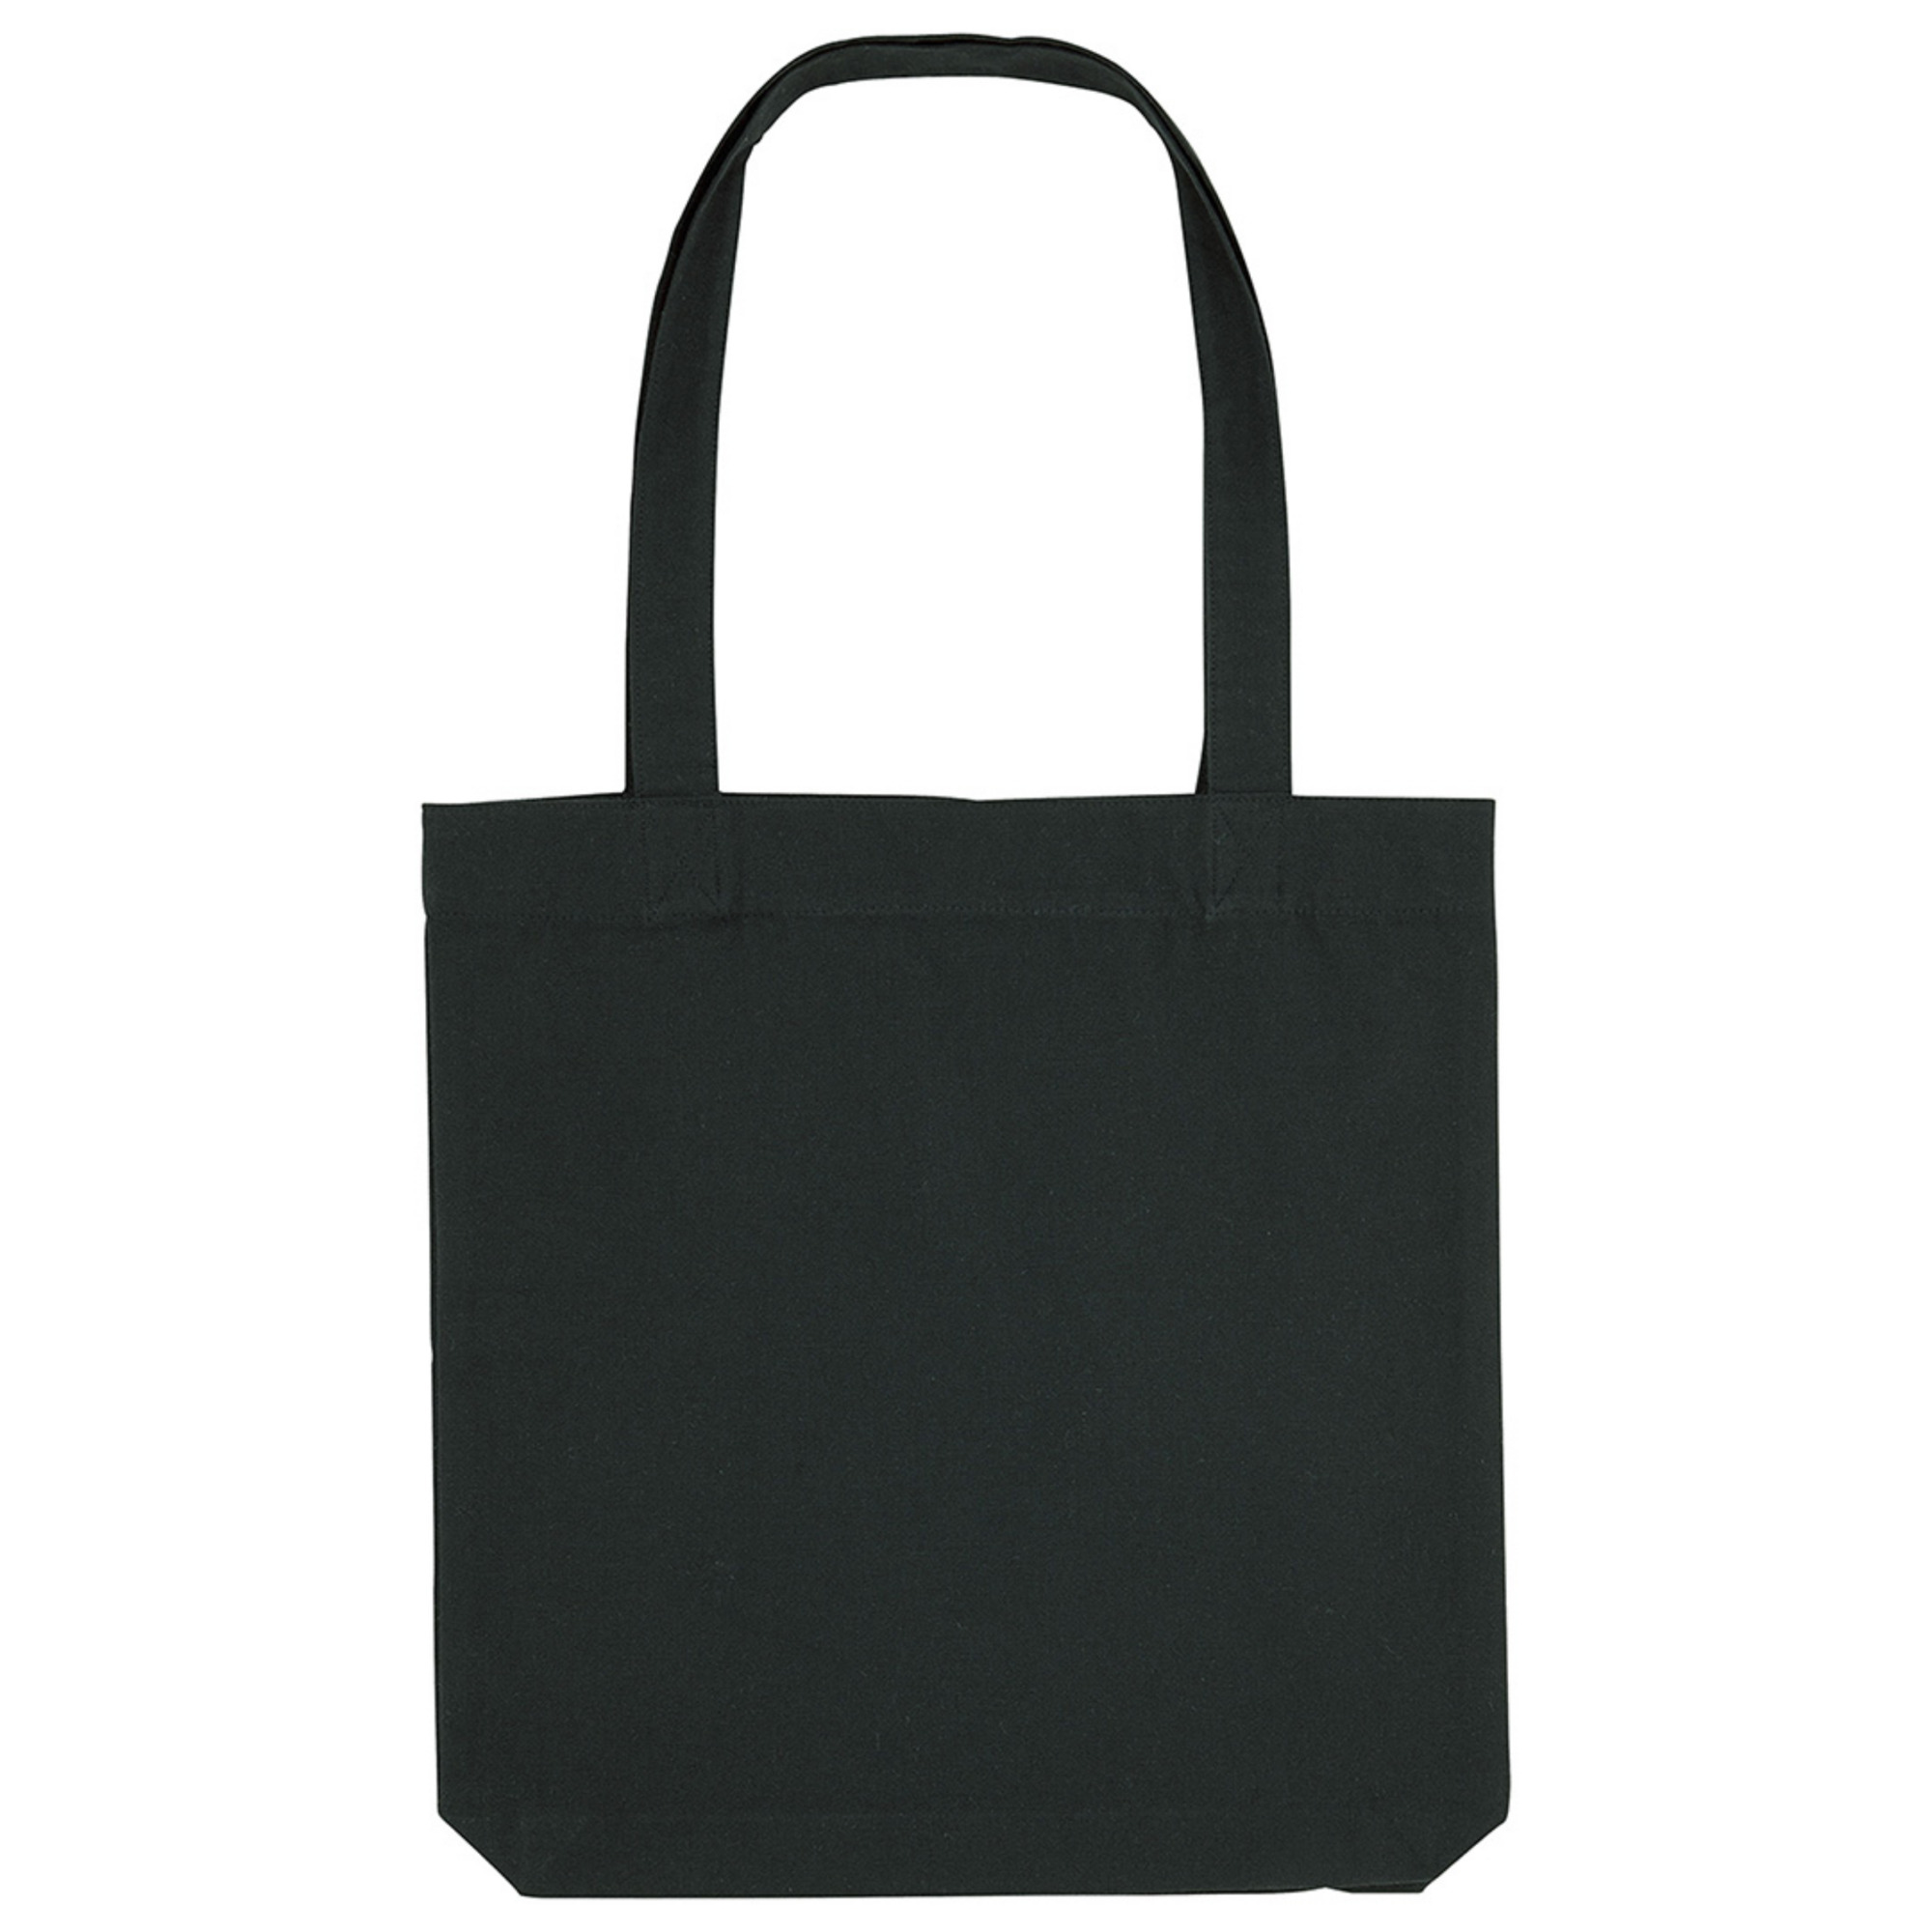 Eco Find Your Voice Tote Bag (Black)